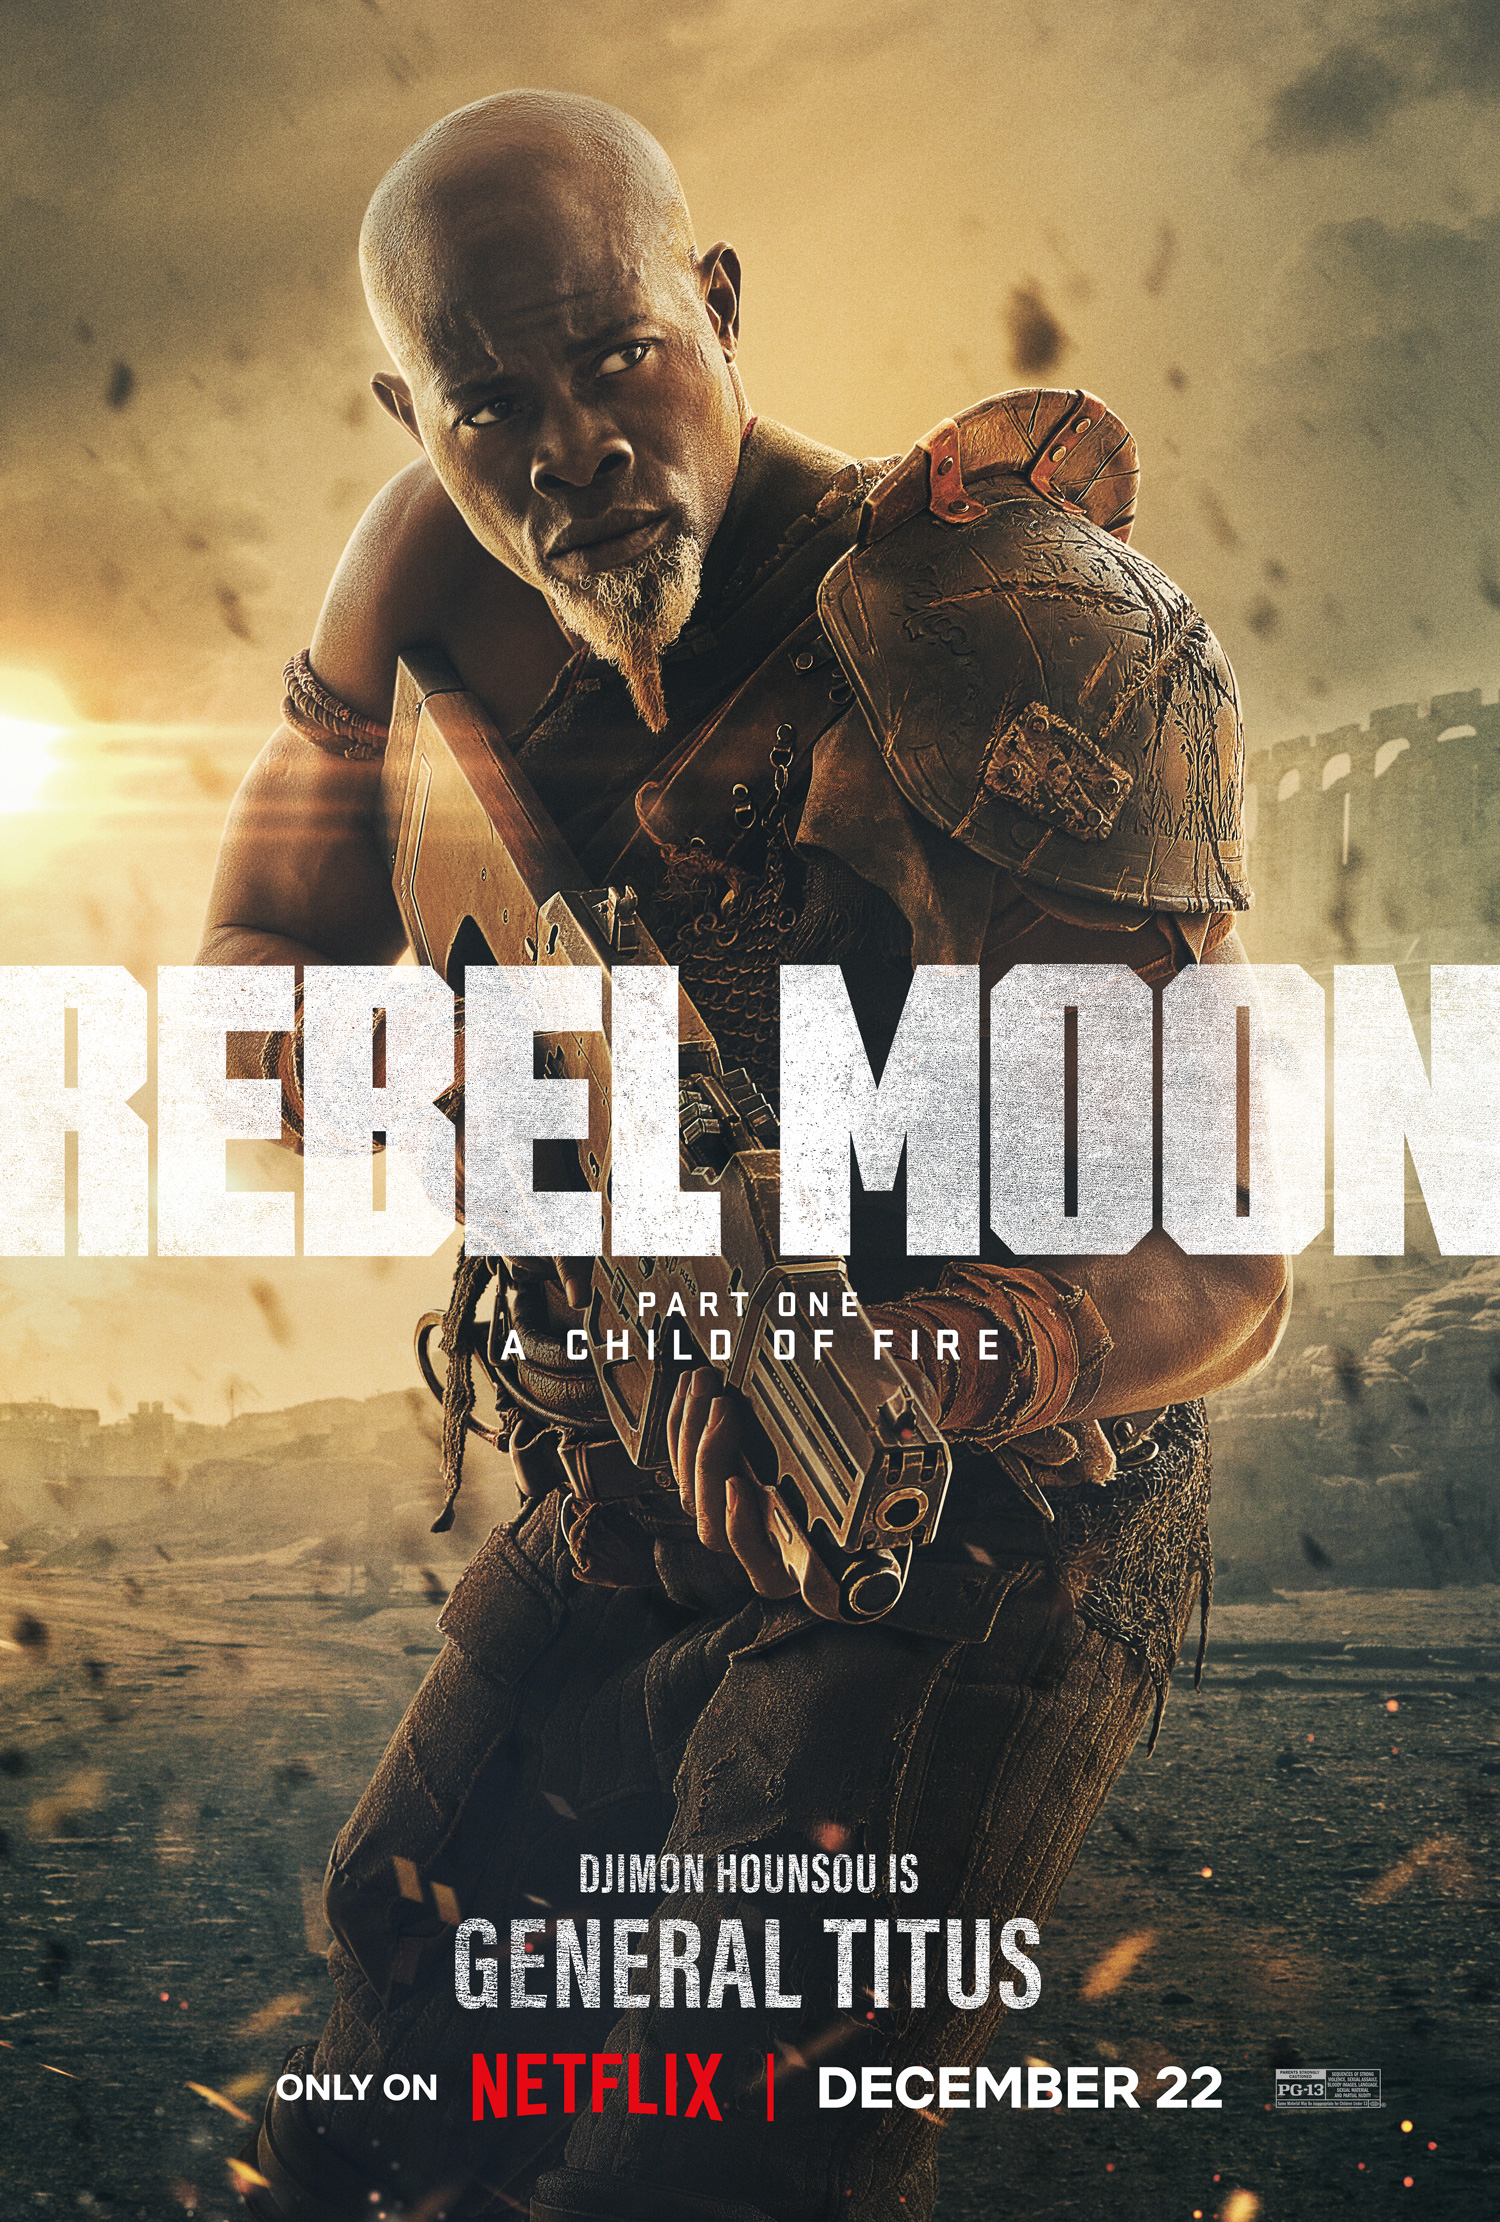 IMDB Lists a Theatrical Release Date for Rebel Moon of Friday, December 15,  2023 : r/SnyderCut